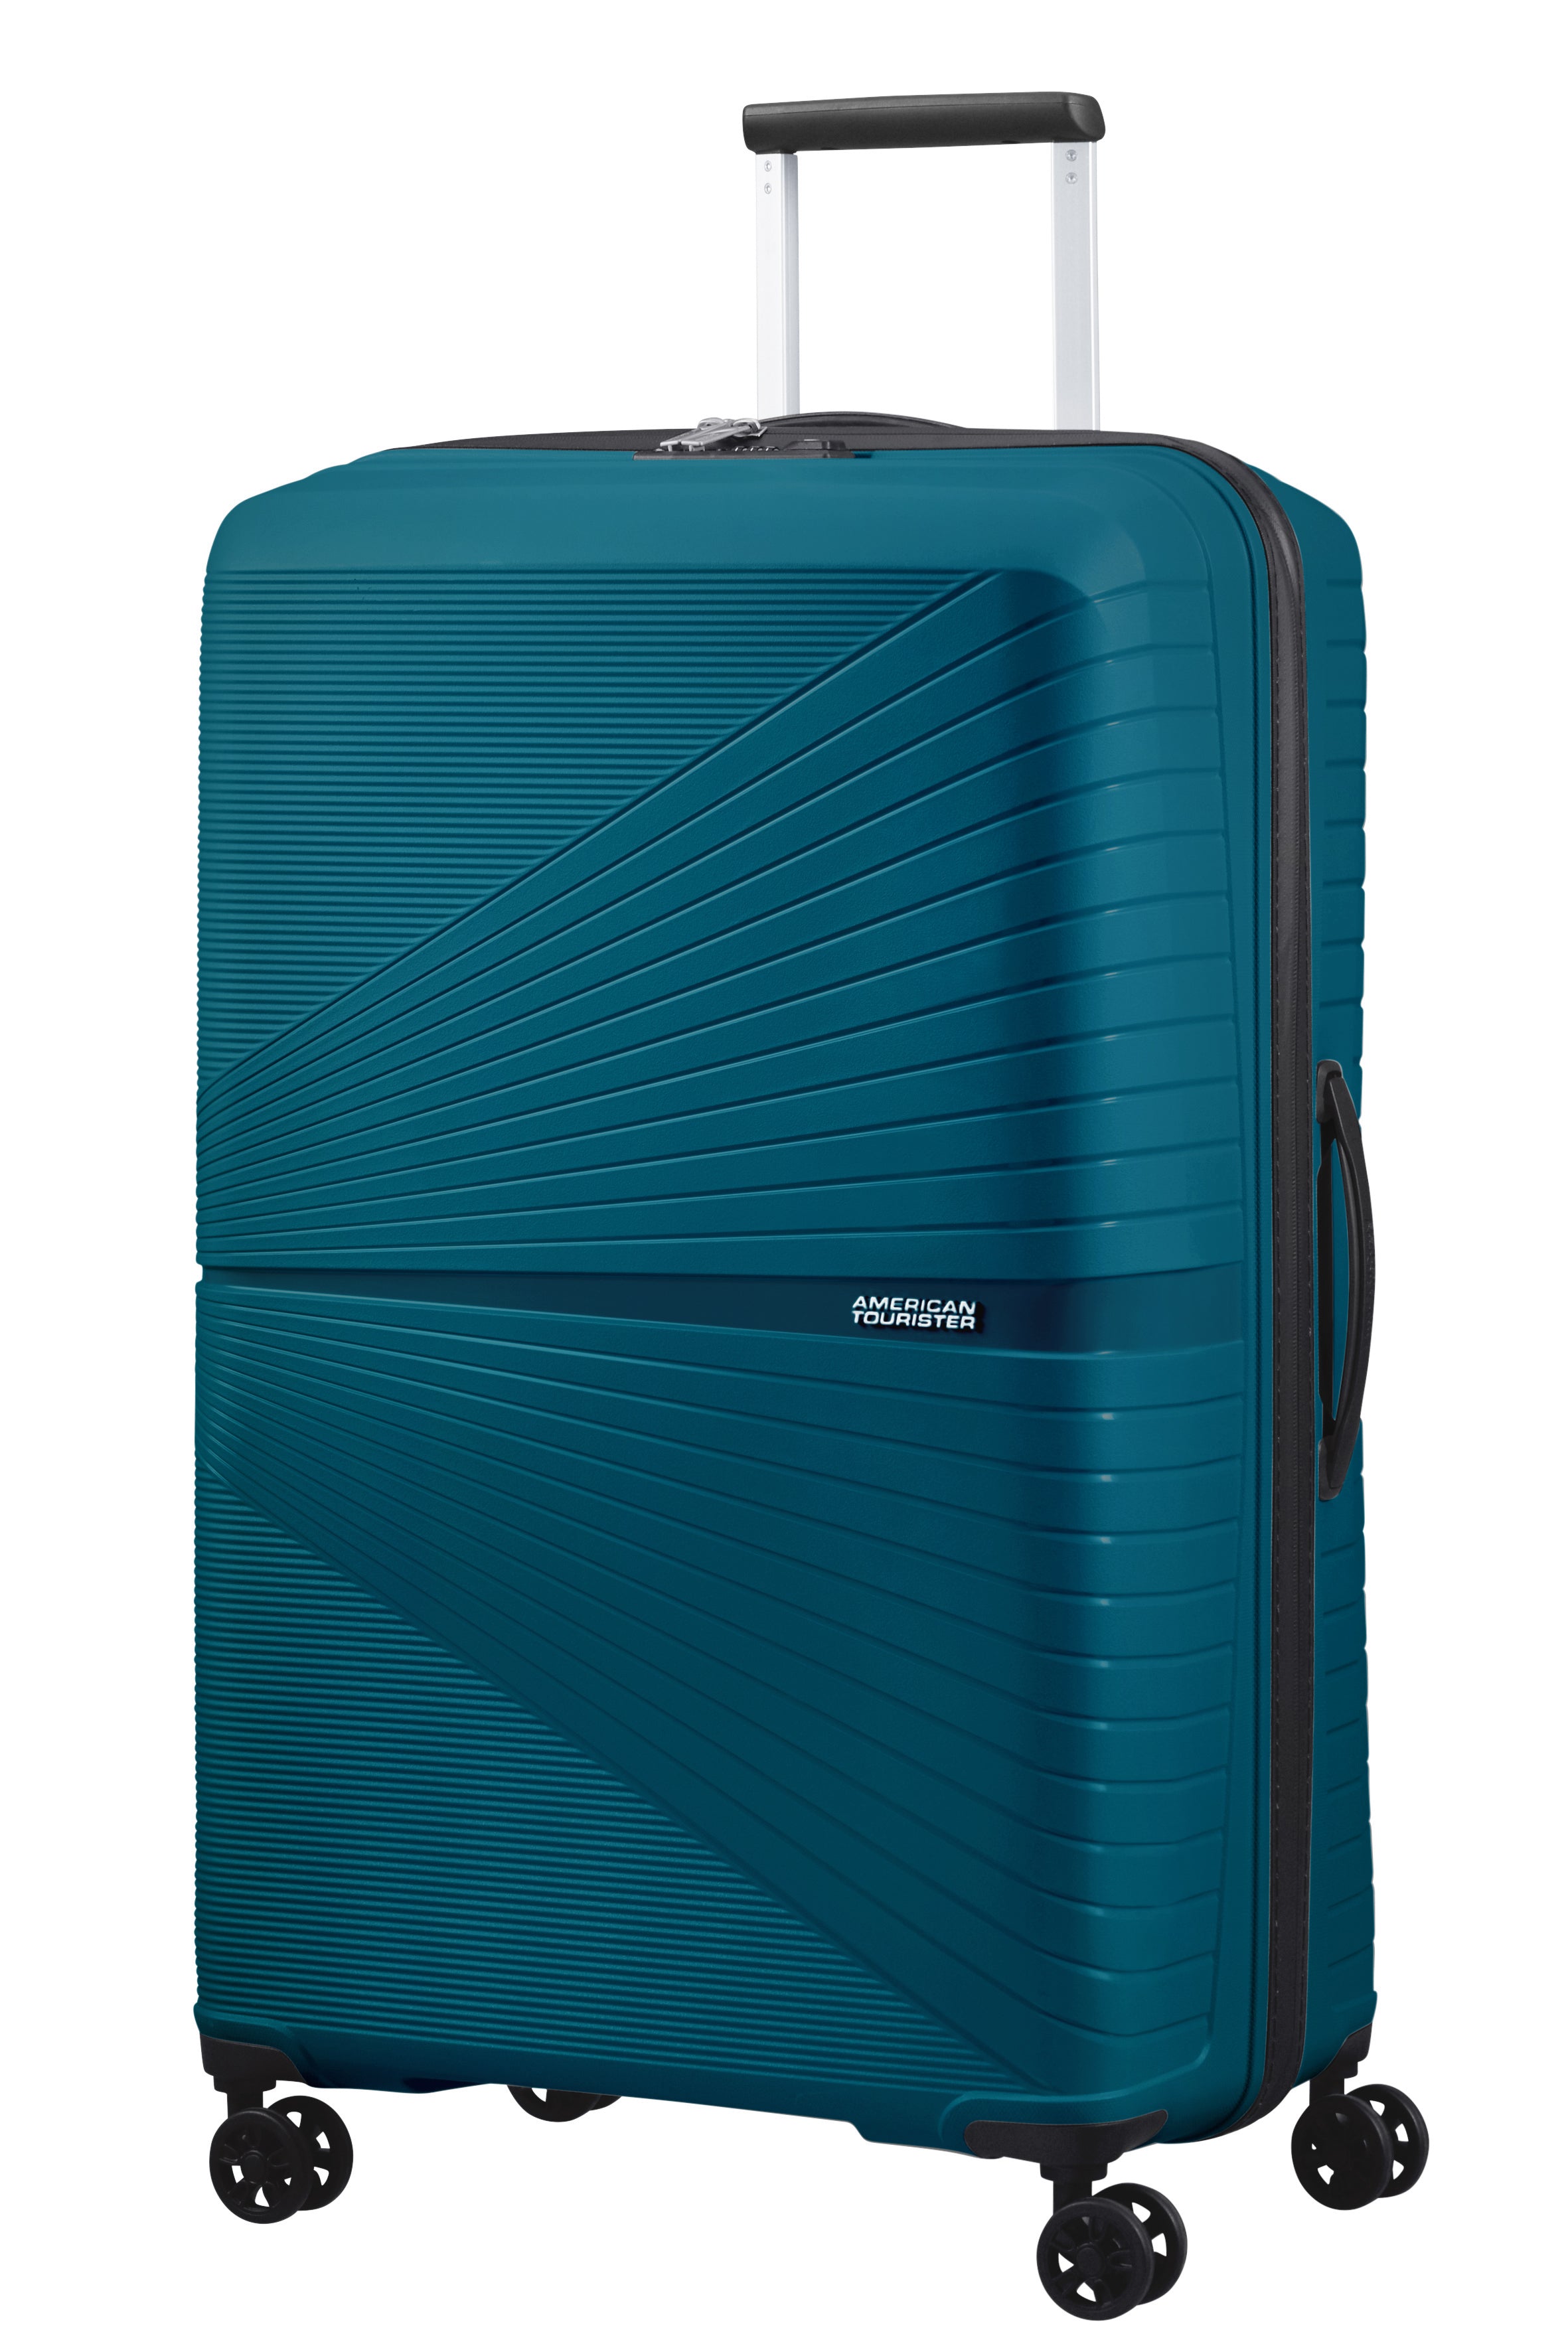 American Tourister - Airconic 77cm Large Suitcase - Deep Ocean